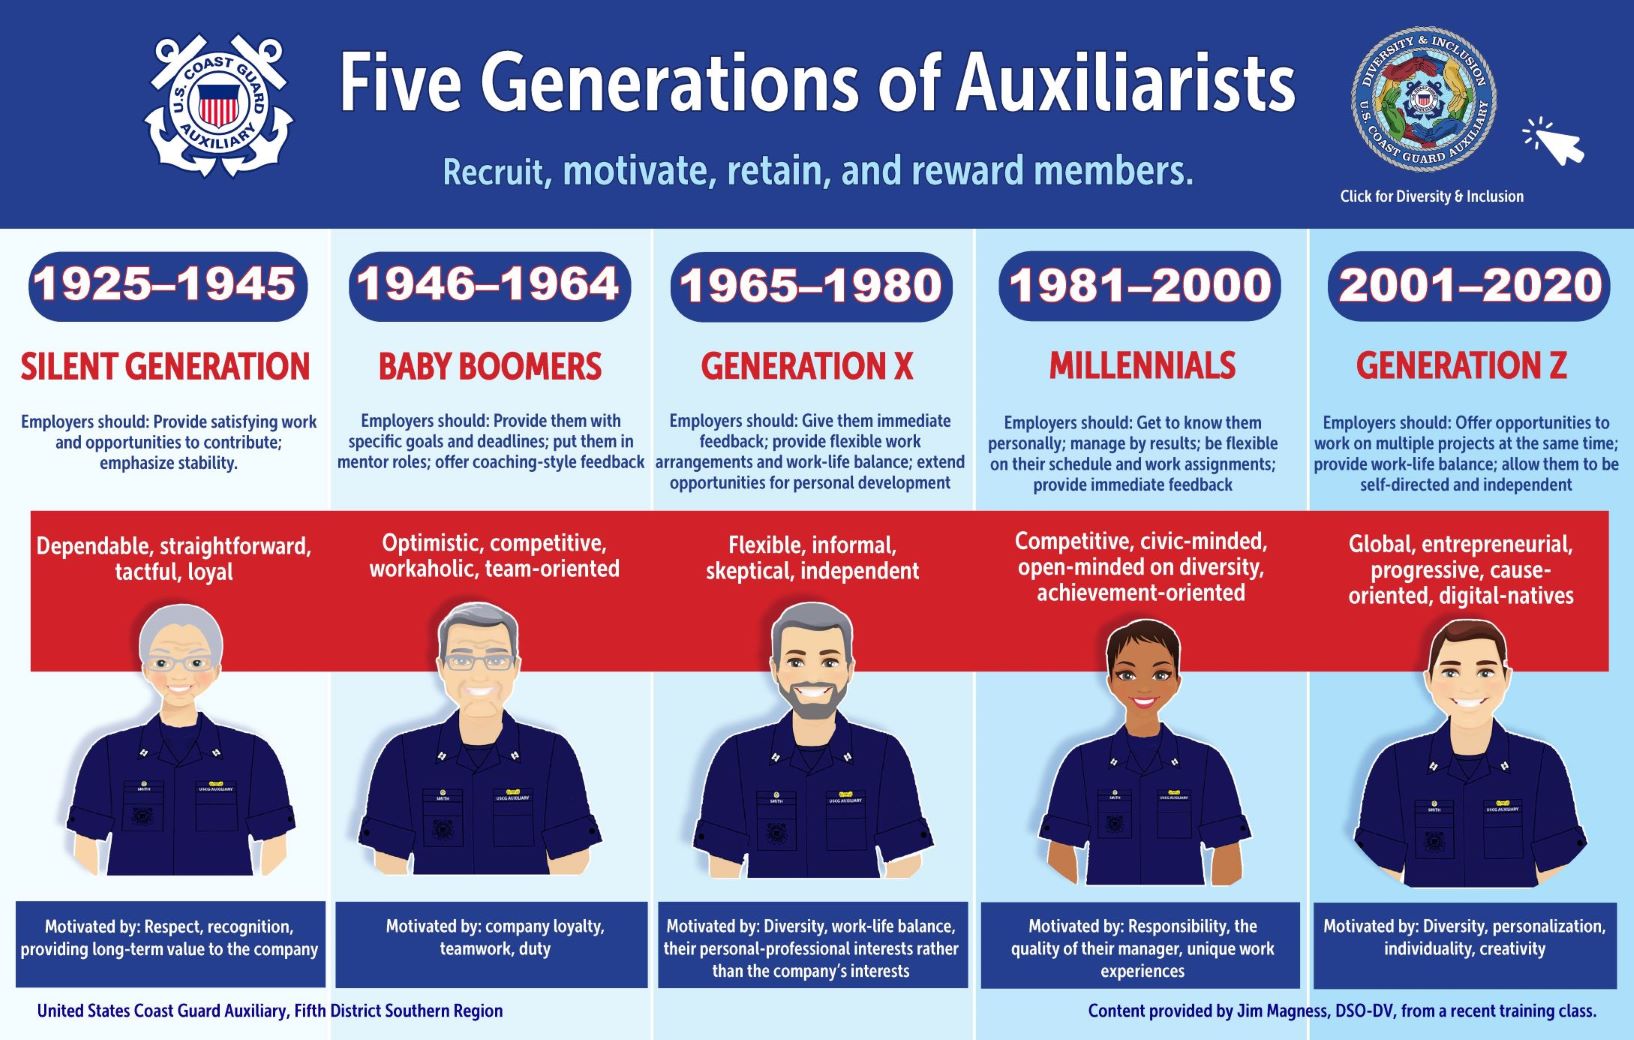 5 generations of Auxiliarists